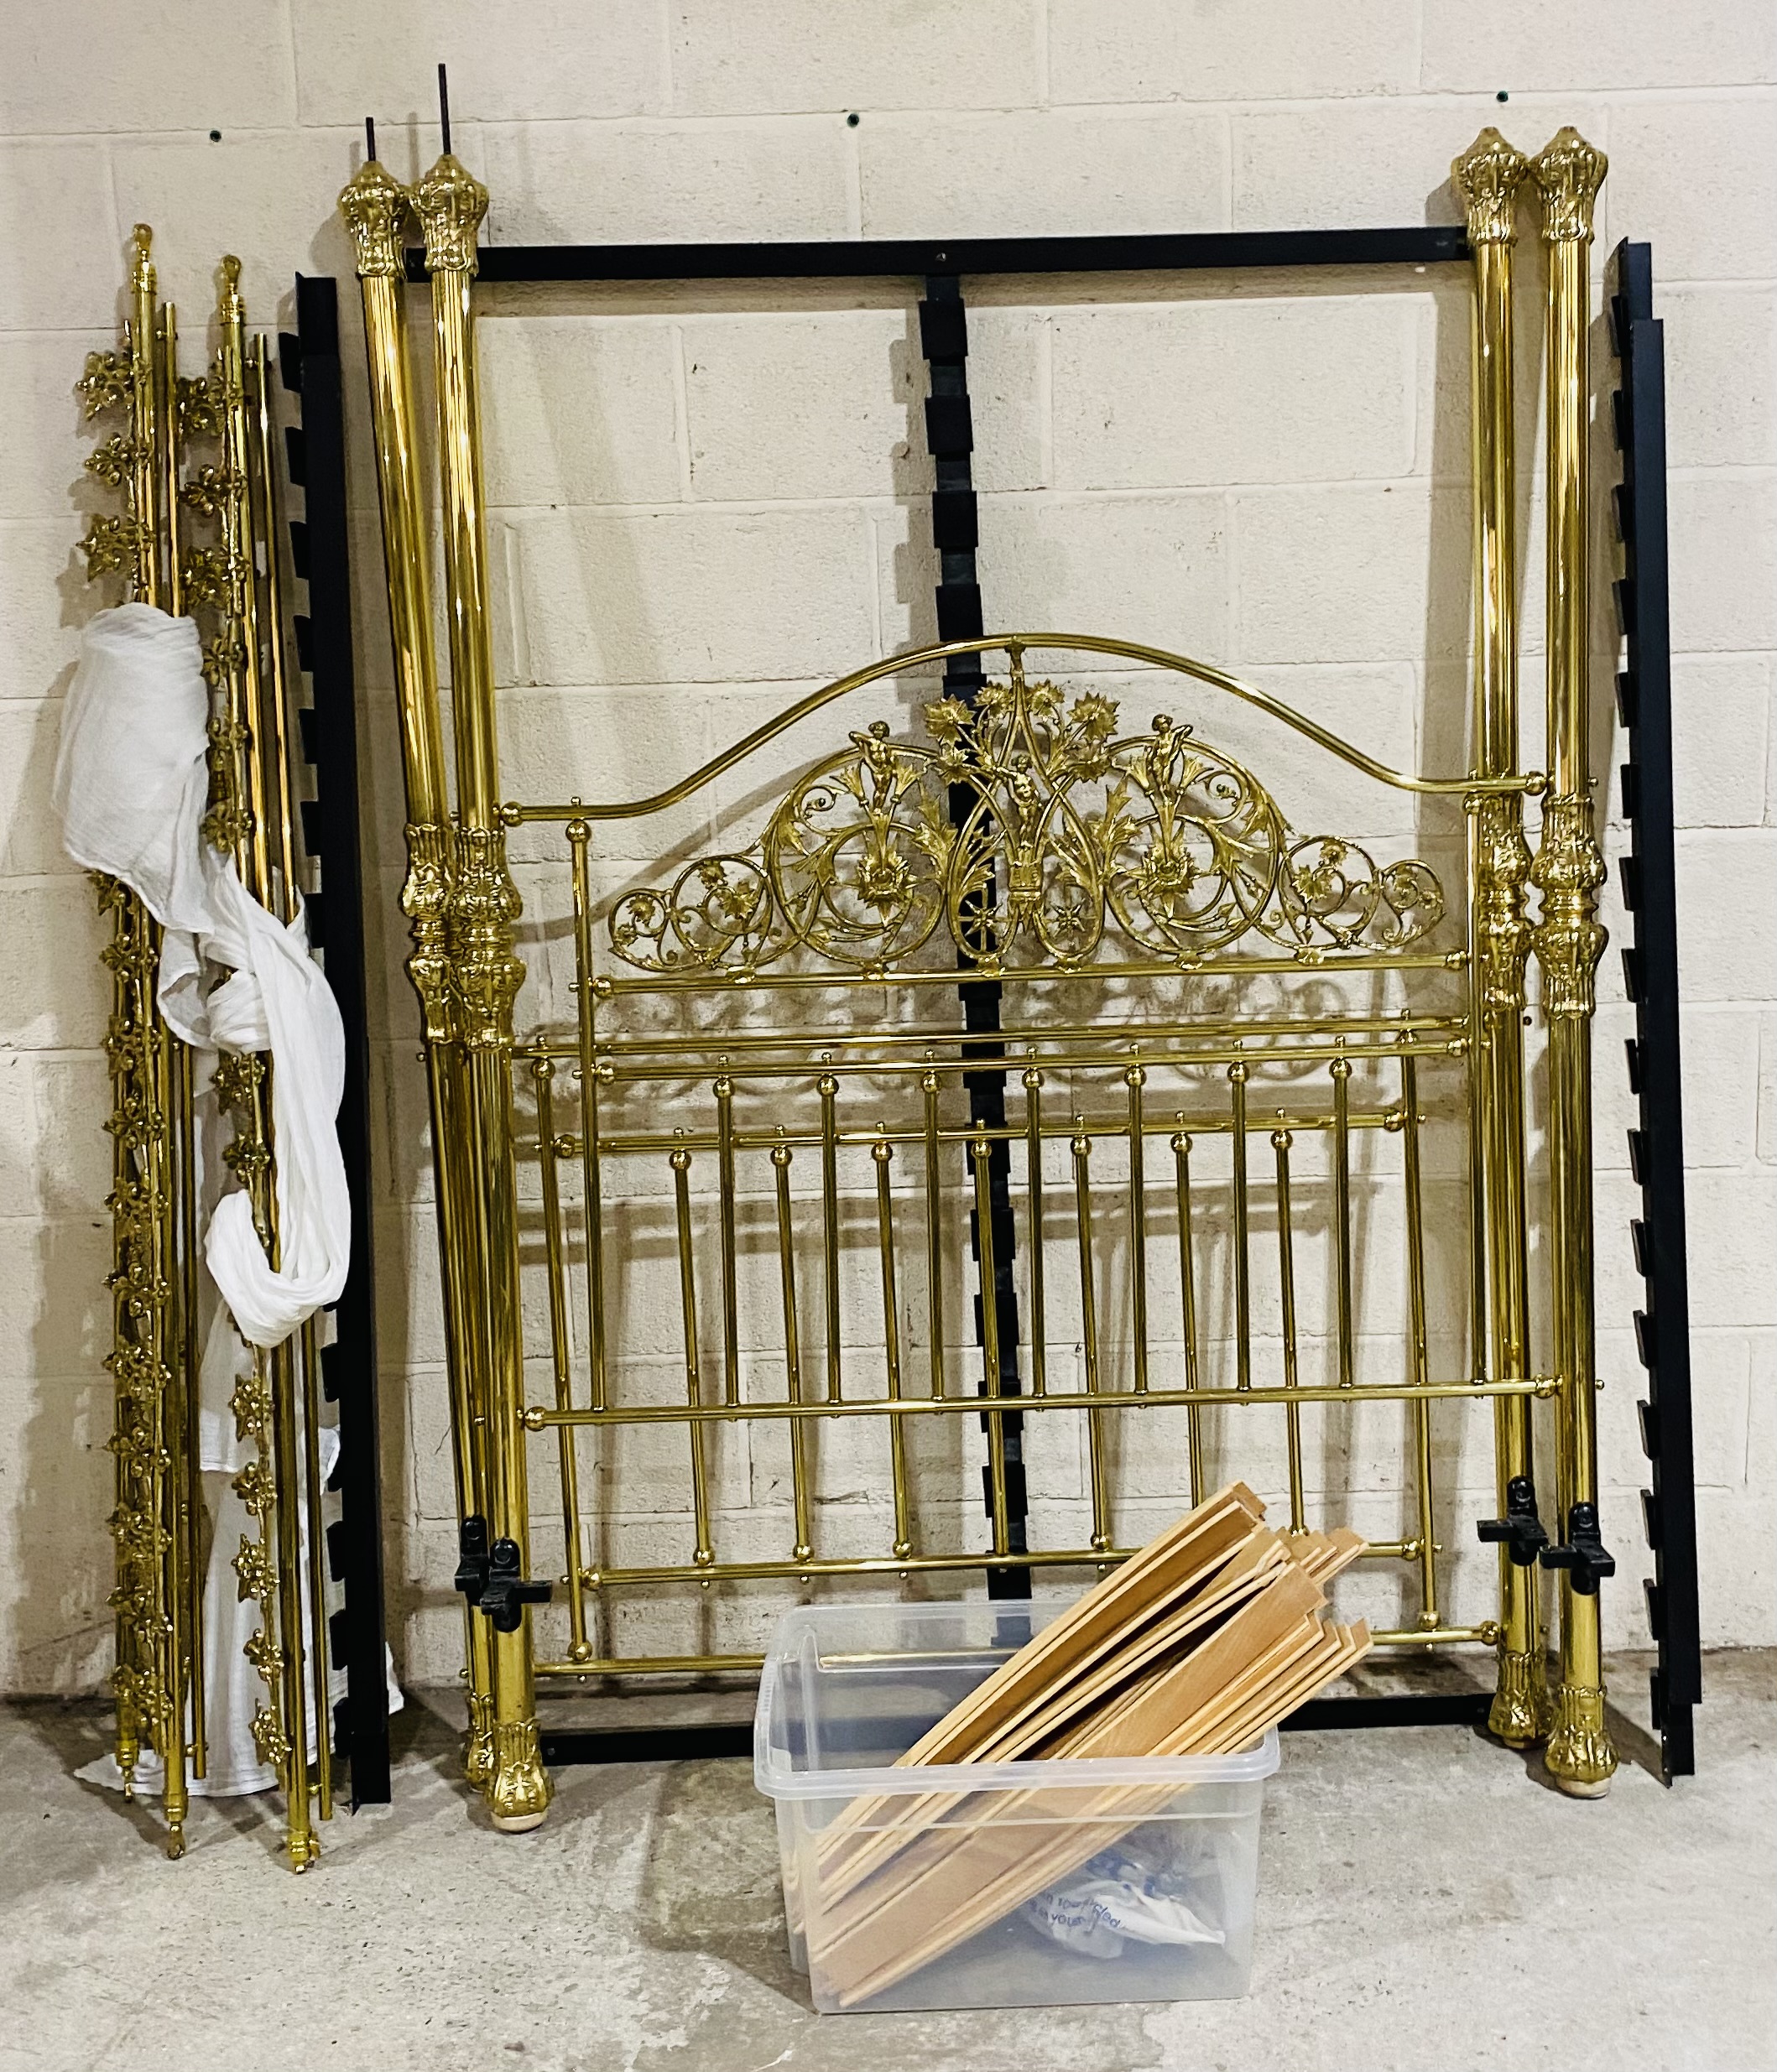 An ornate brass four poster bed